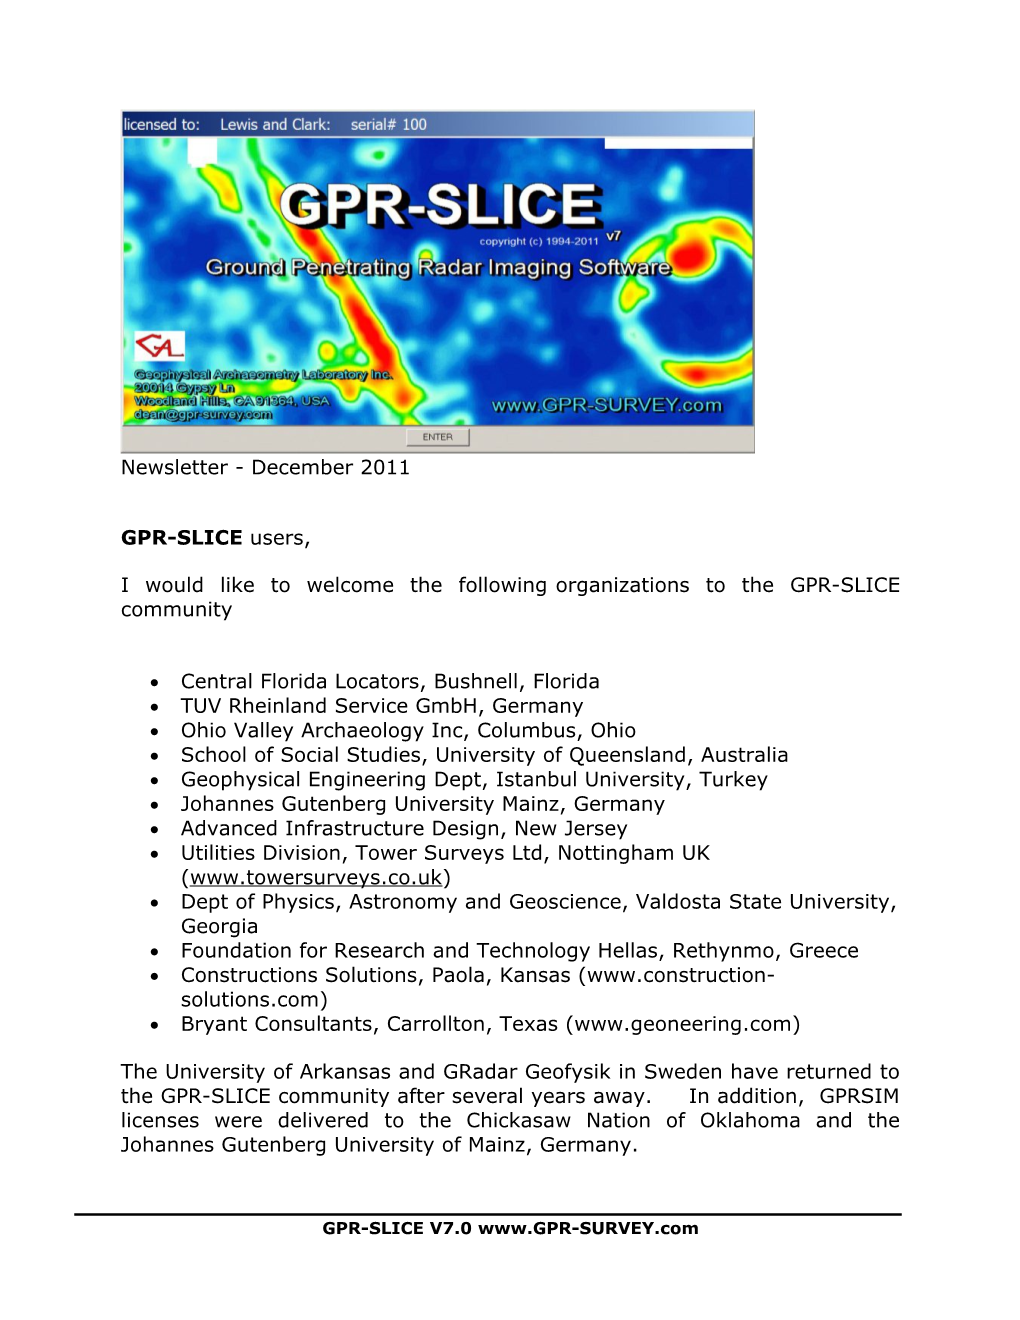 I Would Like to Welcome the Followingorganizations to the GPR-SLICE Community